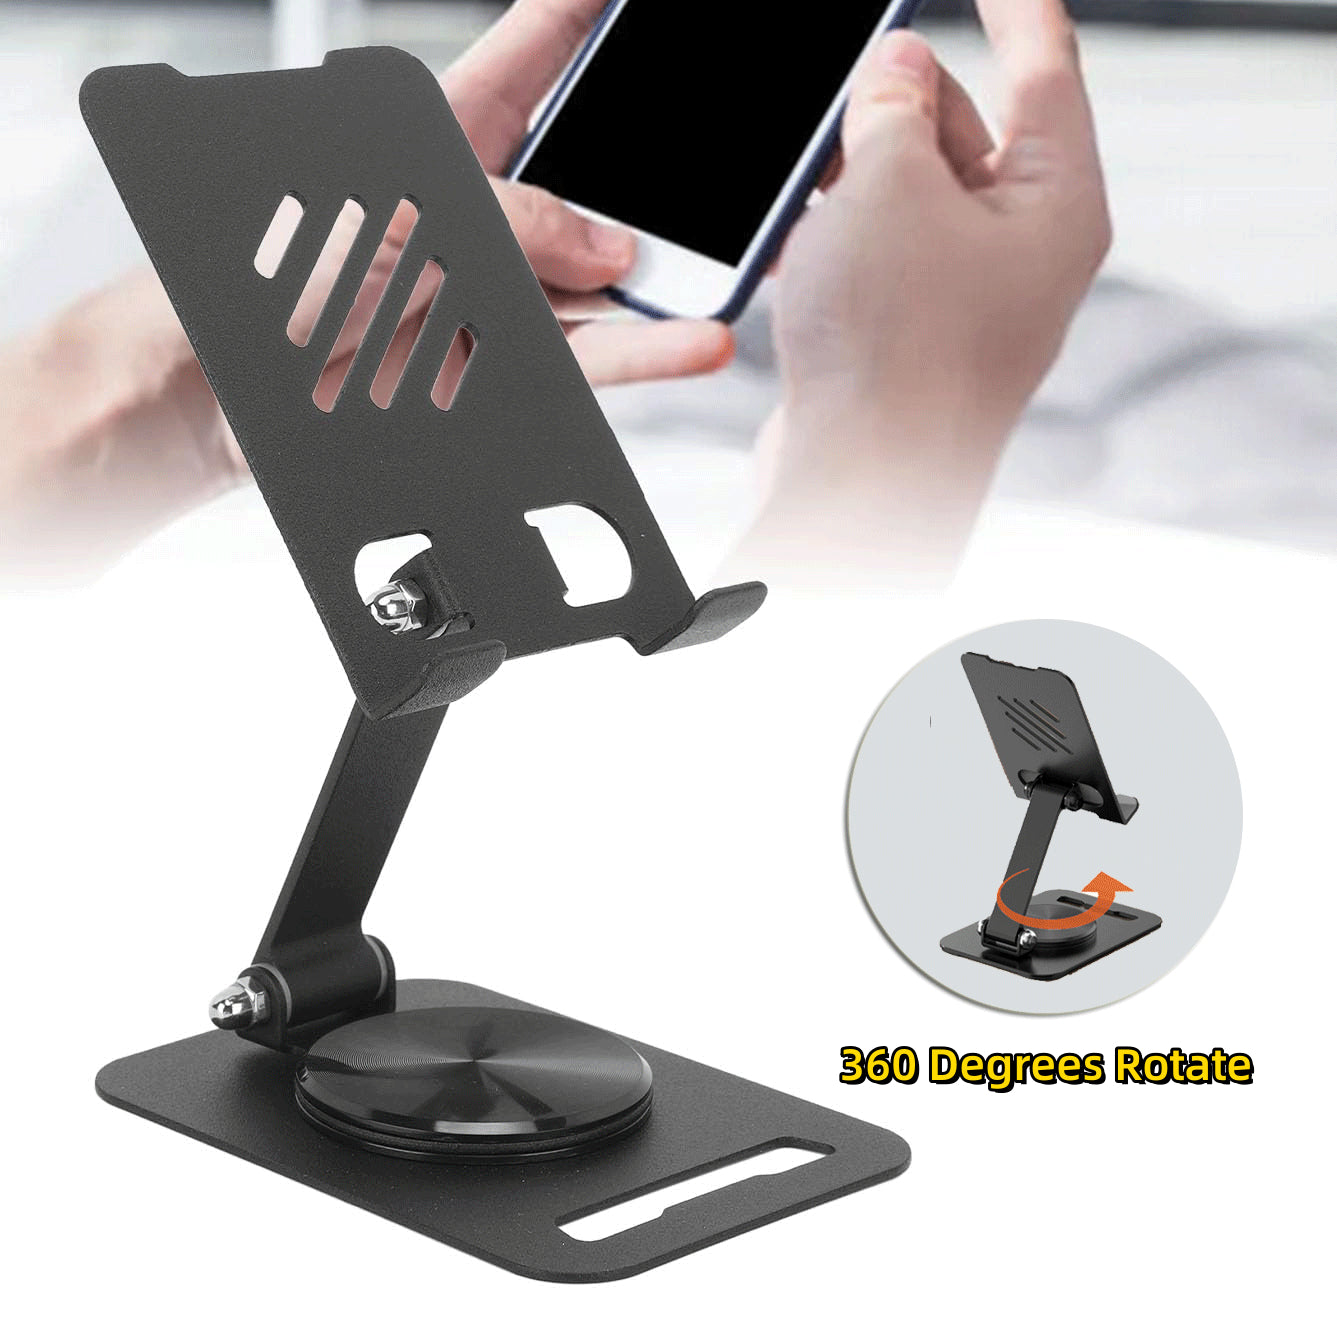 360 Degrees Rotate Metal Desk Mobile Phone Holder Stand For Phone Pad Adjustable Desktop Tablet Holderl Table Cell Phone Stand